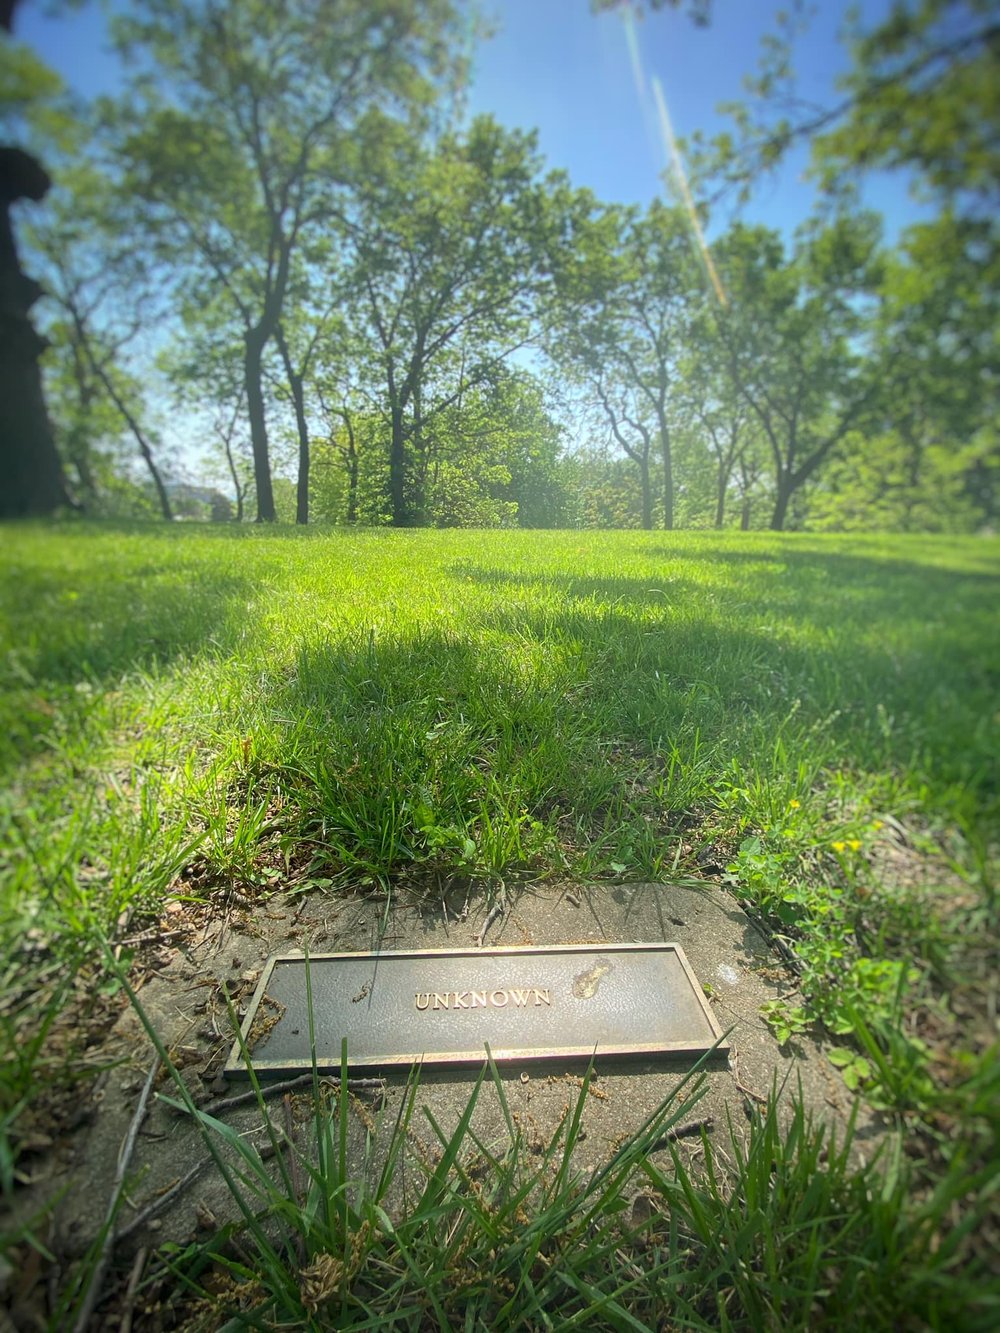  There are hundreds of graves here, many unmarked or whose names are unknown. They were mostly indigenous people but at one point some Union soldiers were also buried here. 